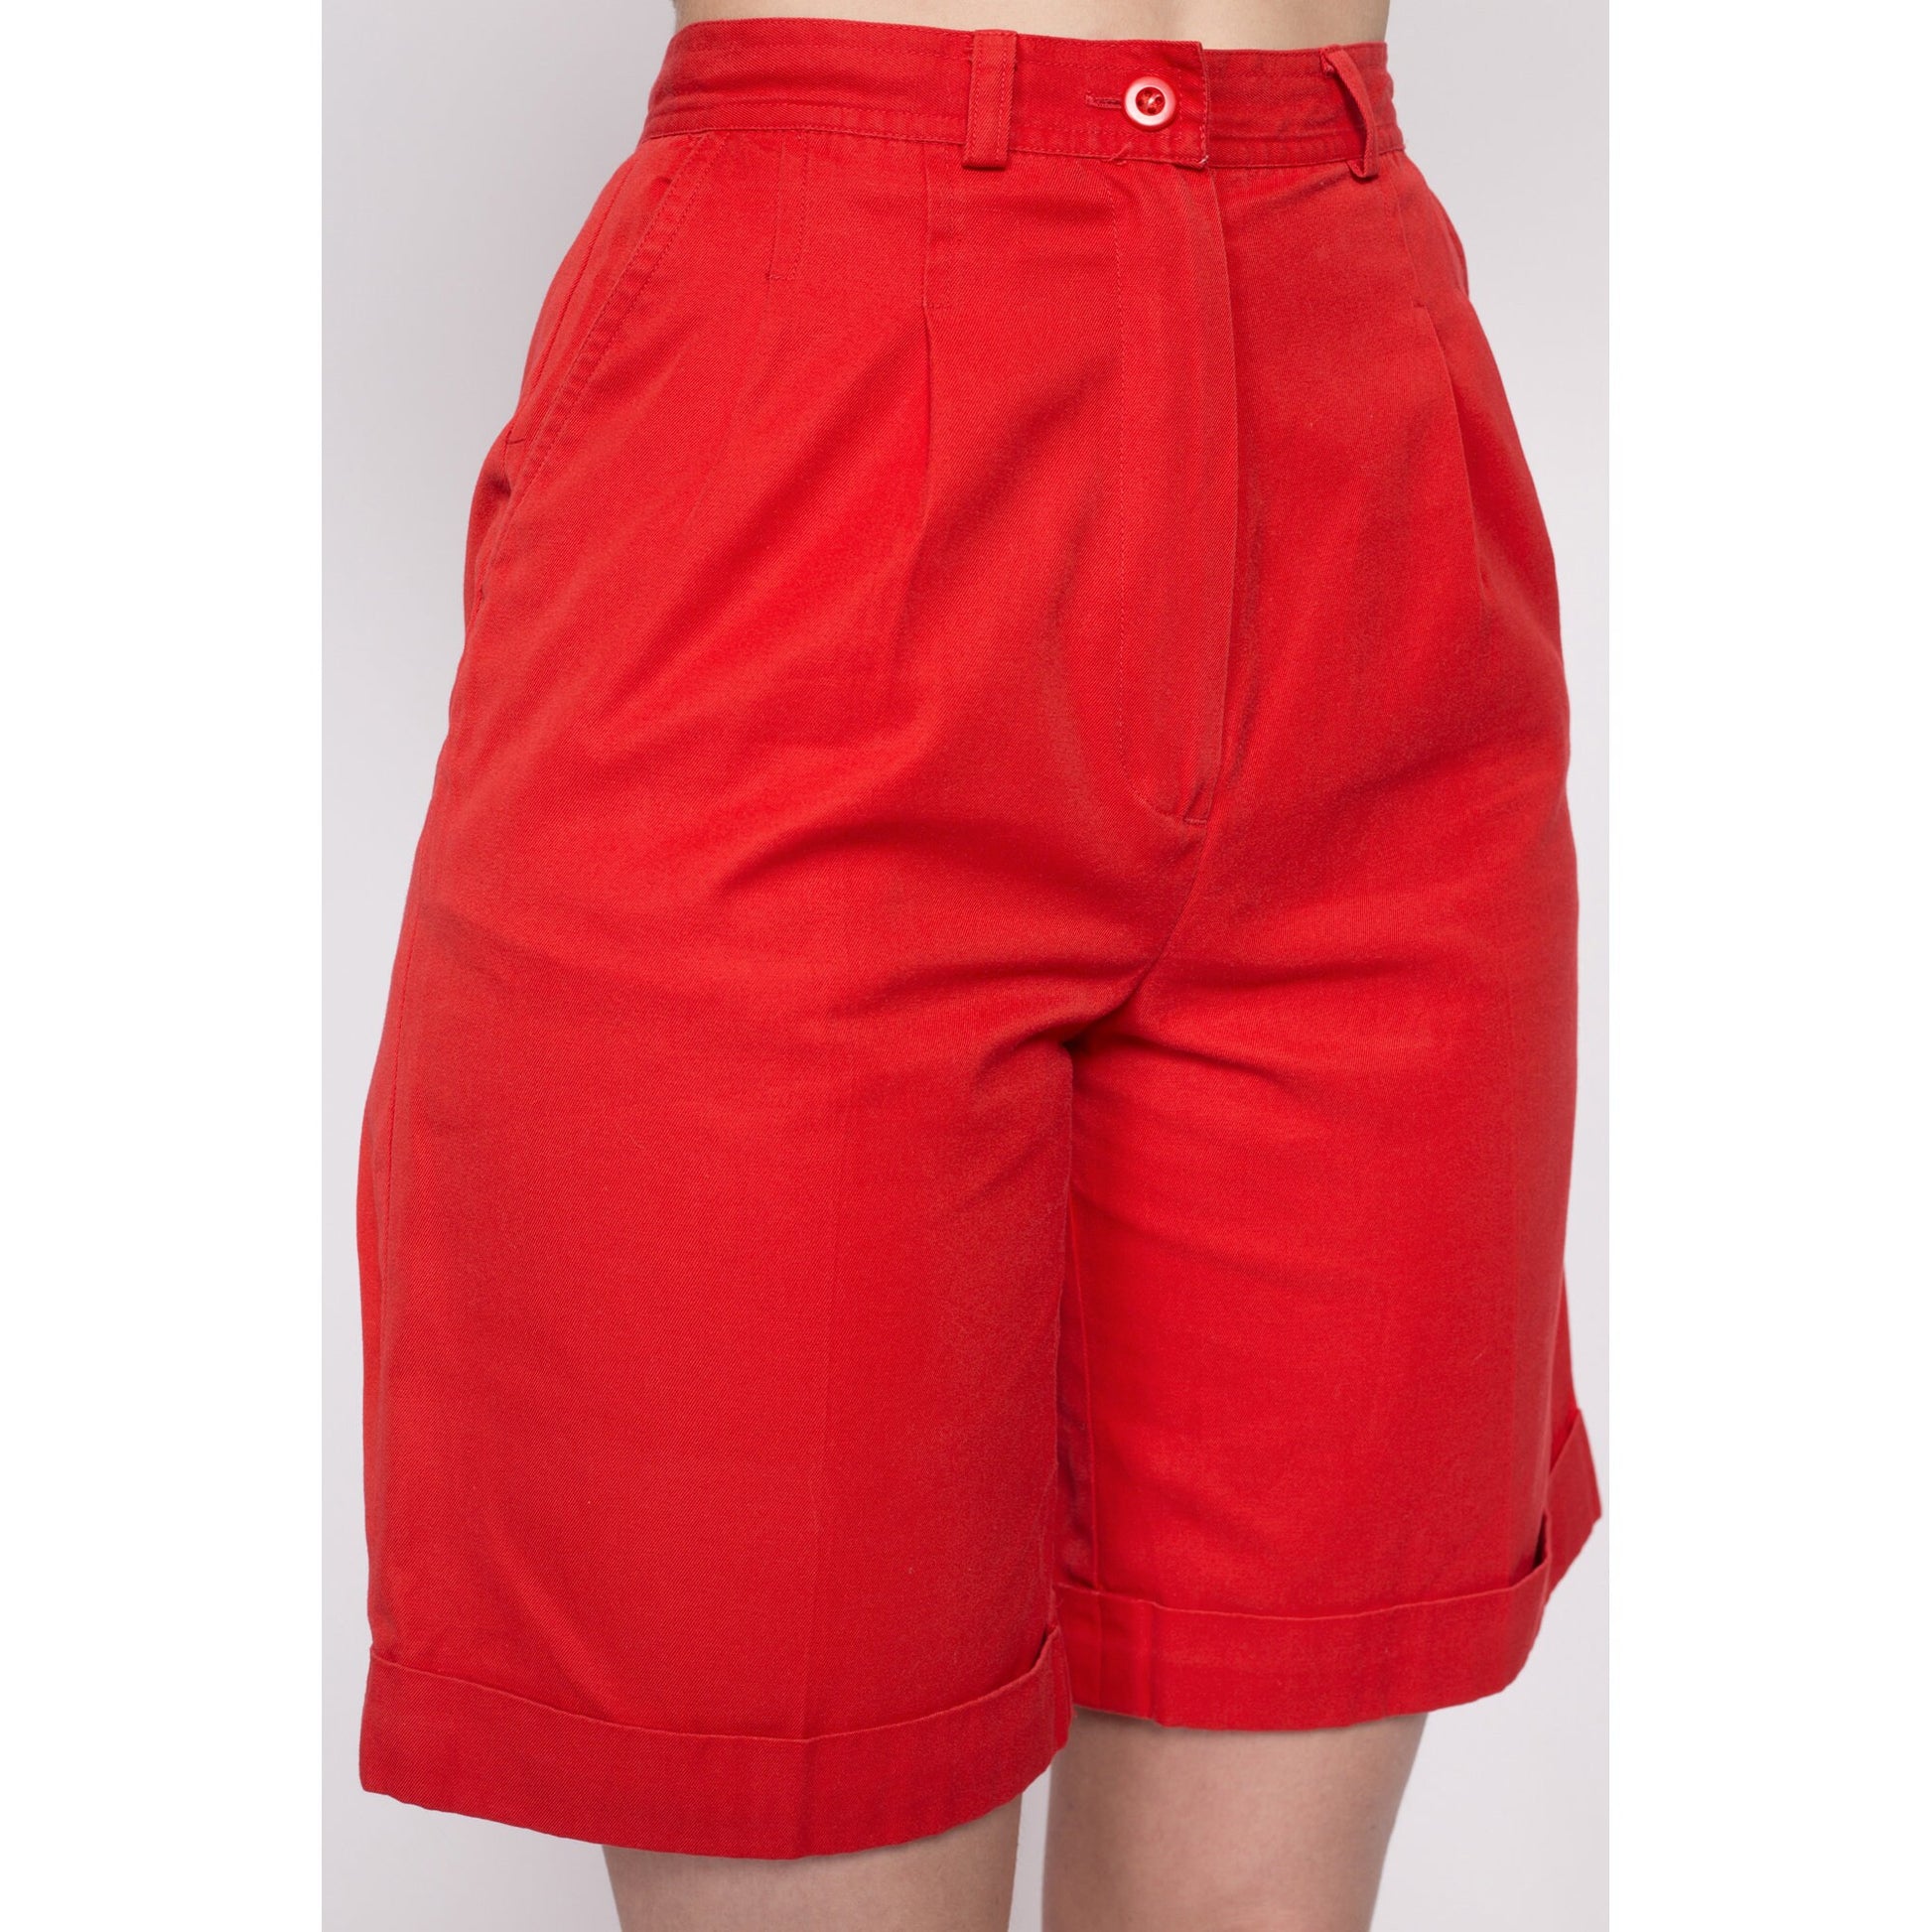 Red High-waisted Shorts for Women